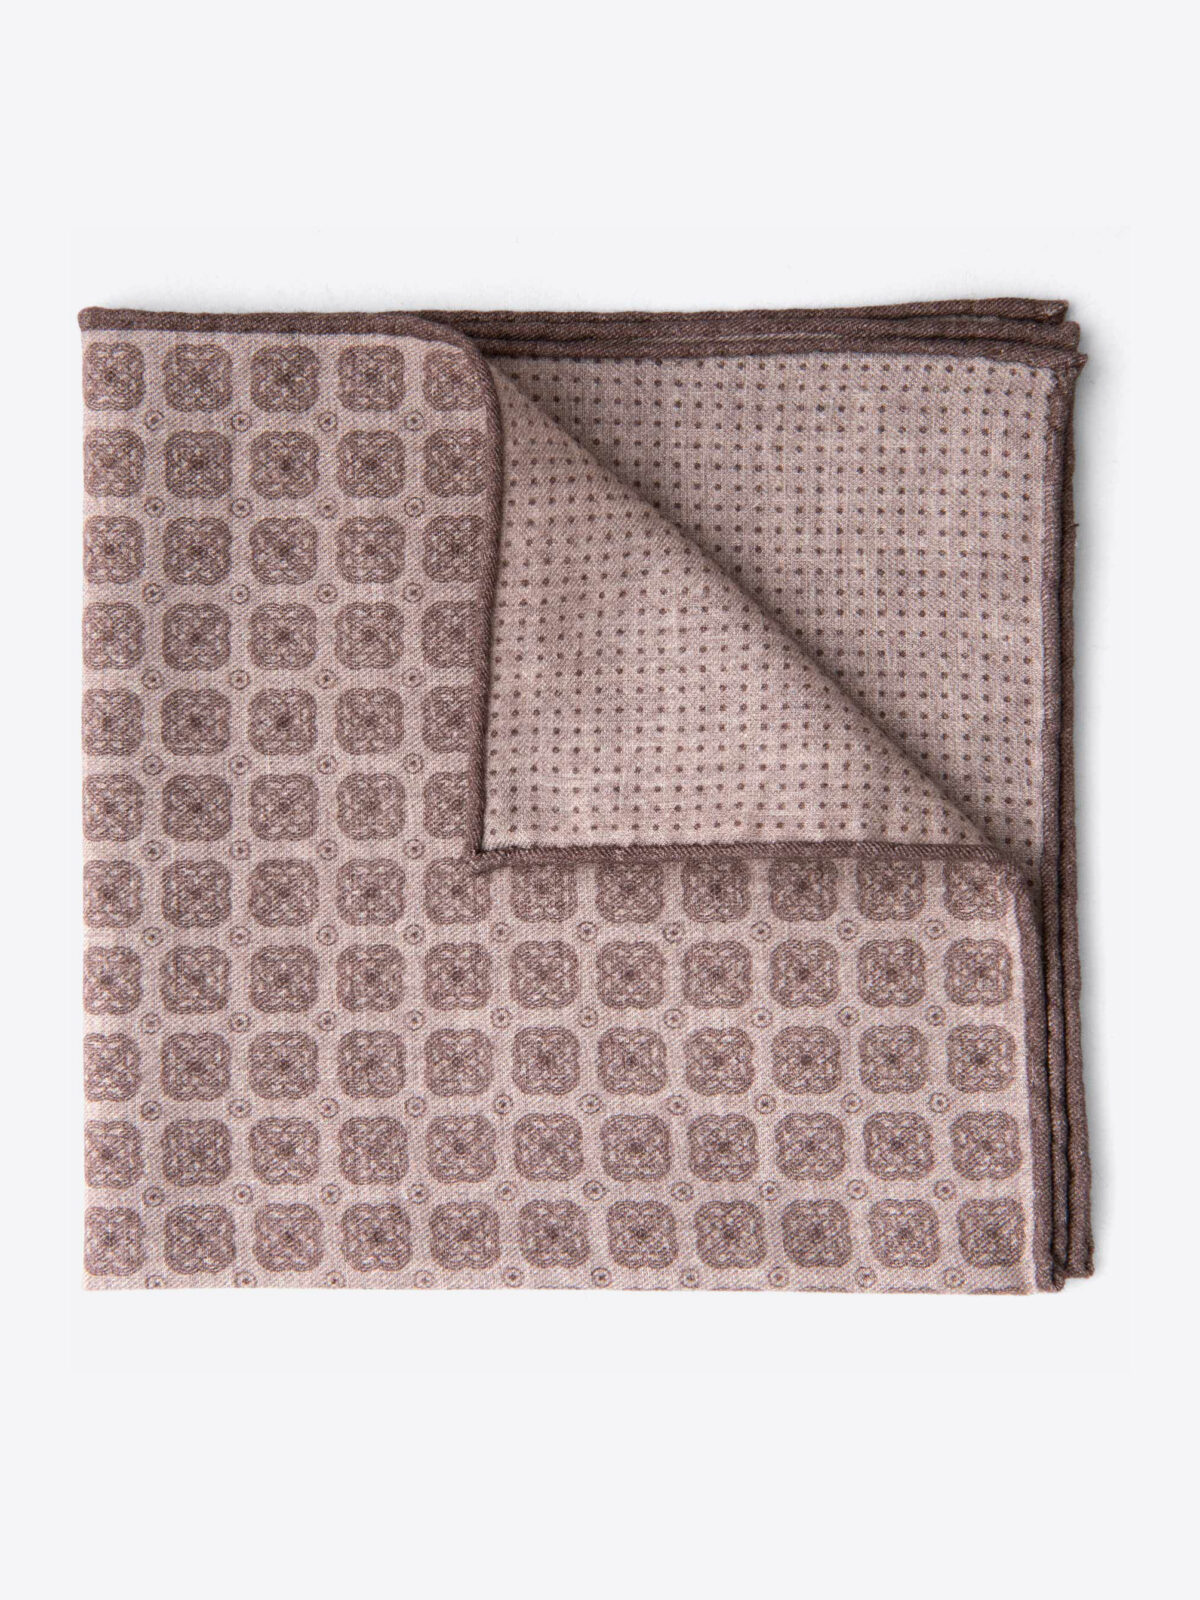 Beige Printed Cotton and Wool Pocket Square